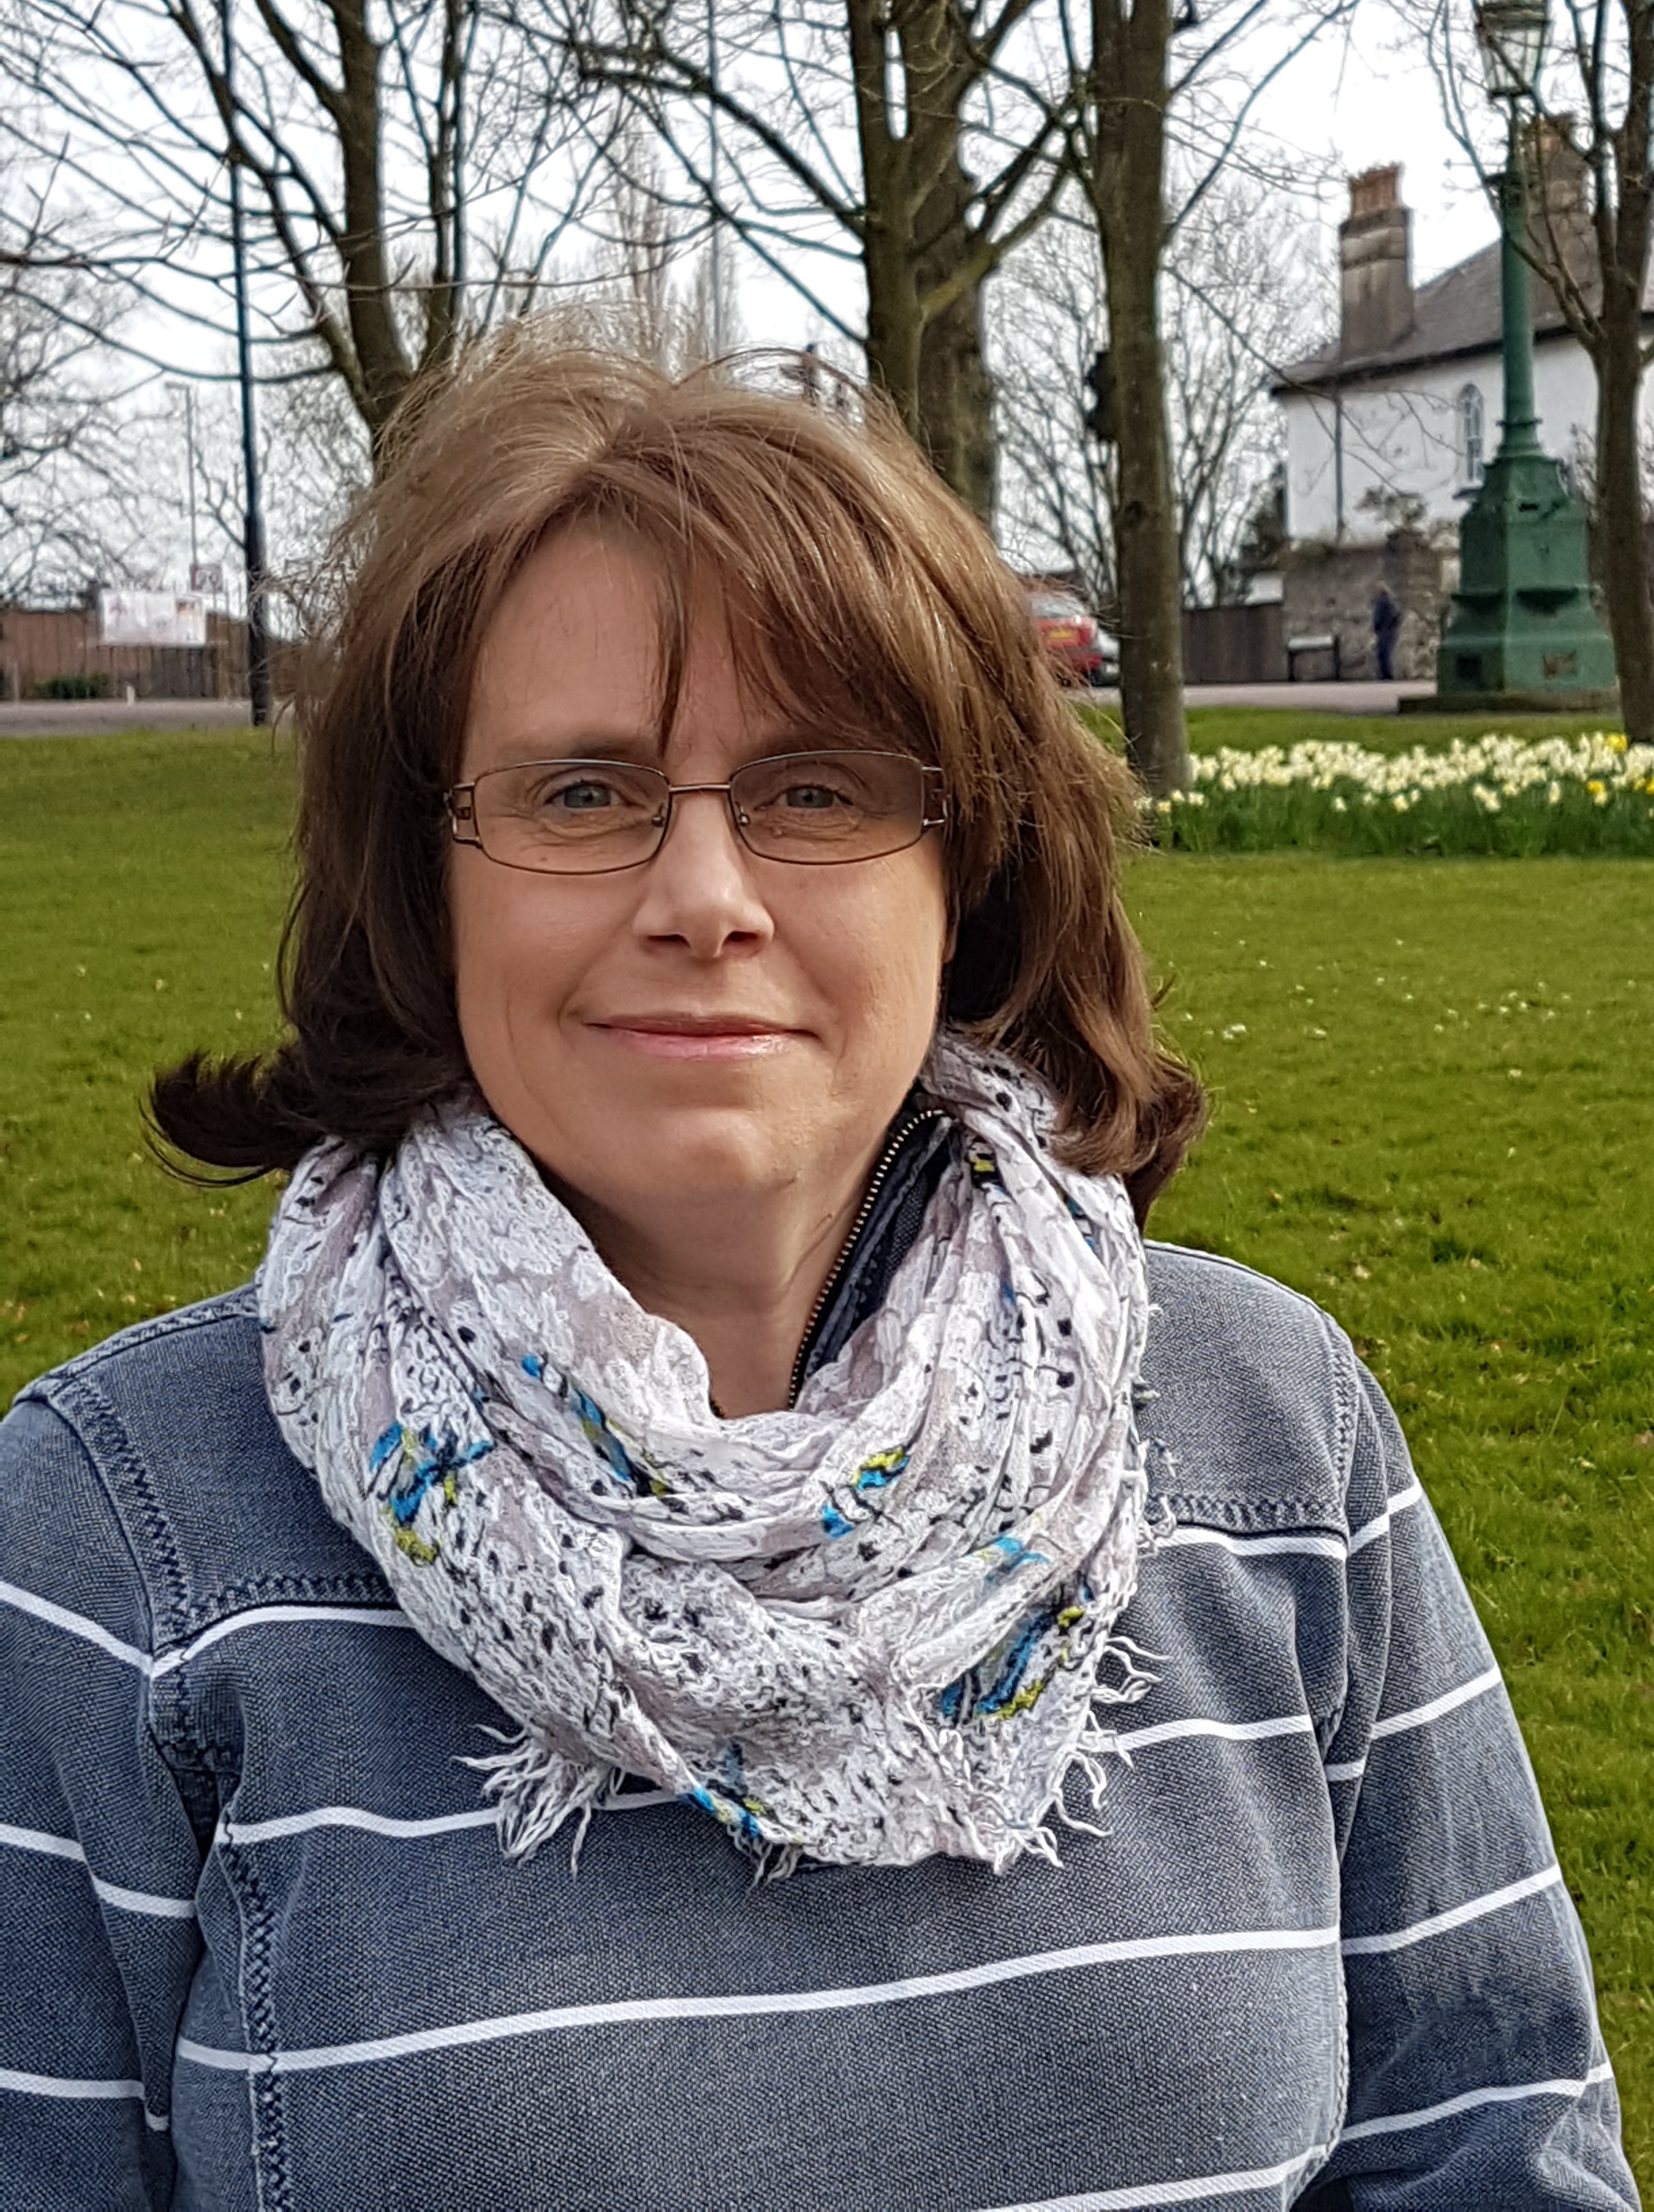 News from Horfield Councillor Claire Hiscott - March 2019